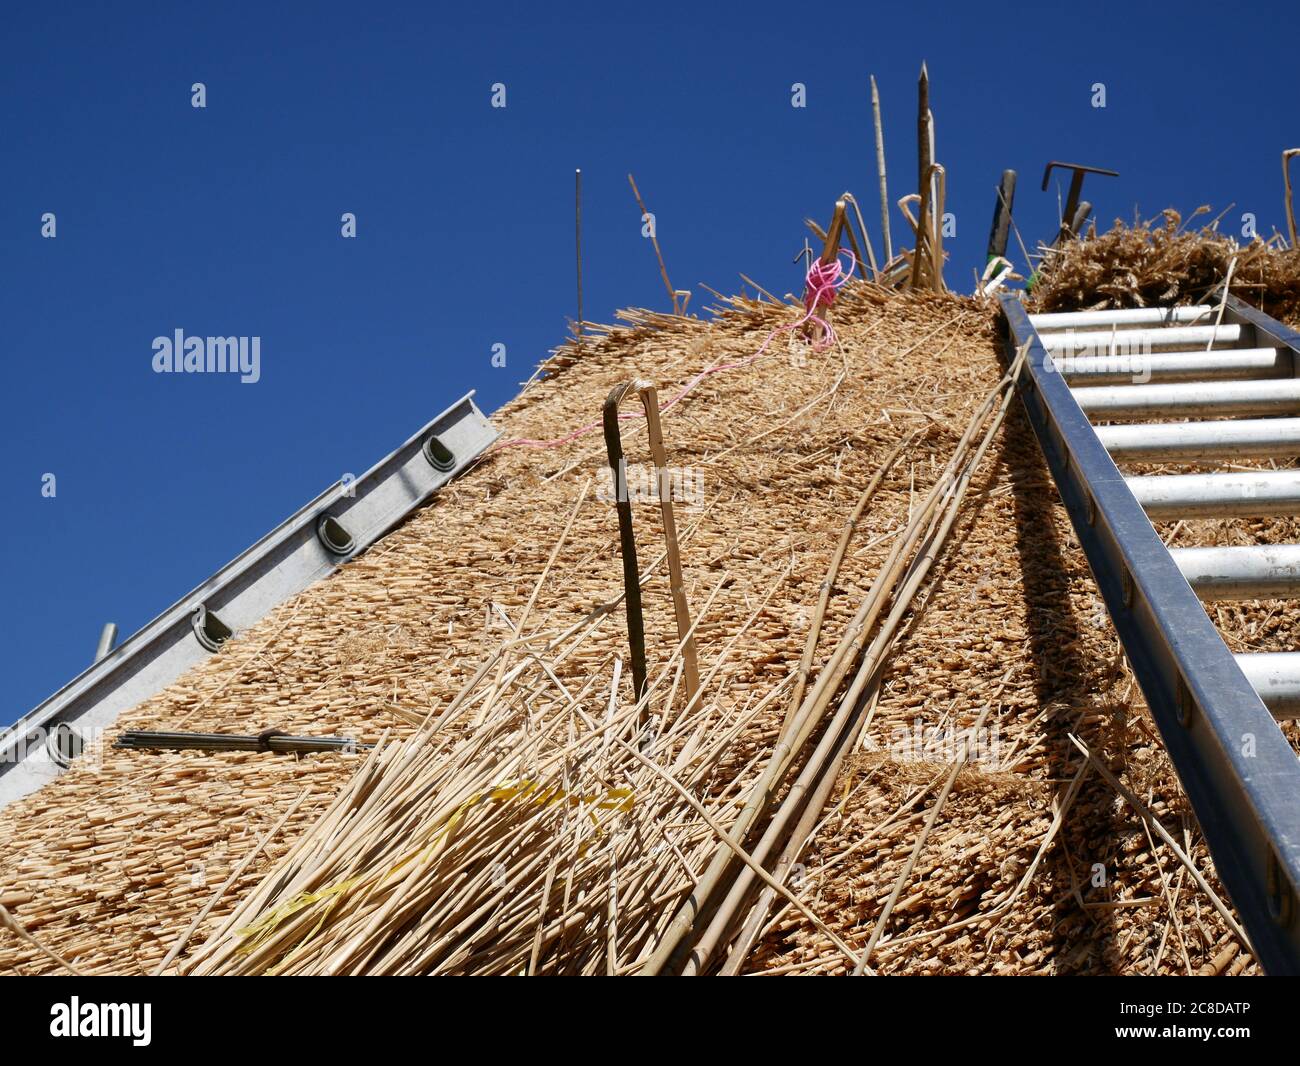 Thatch roof construction Stock Photo